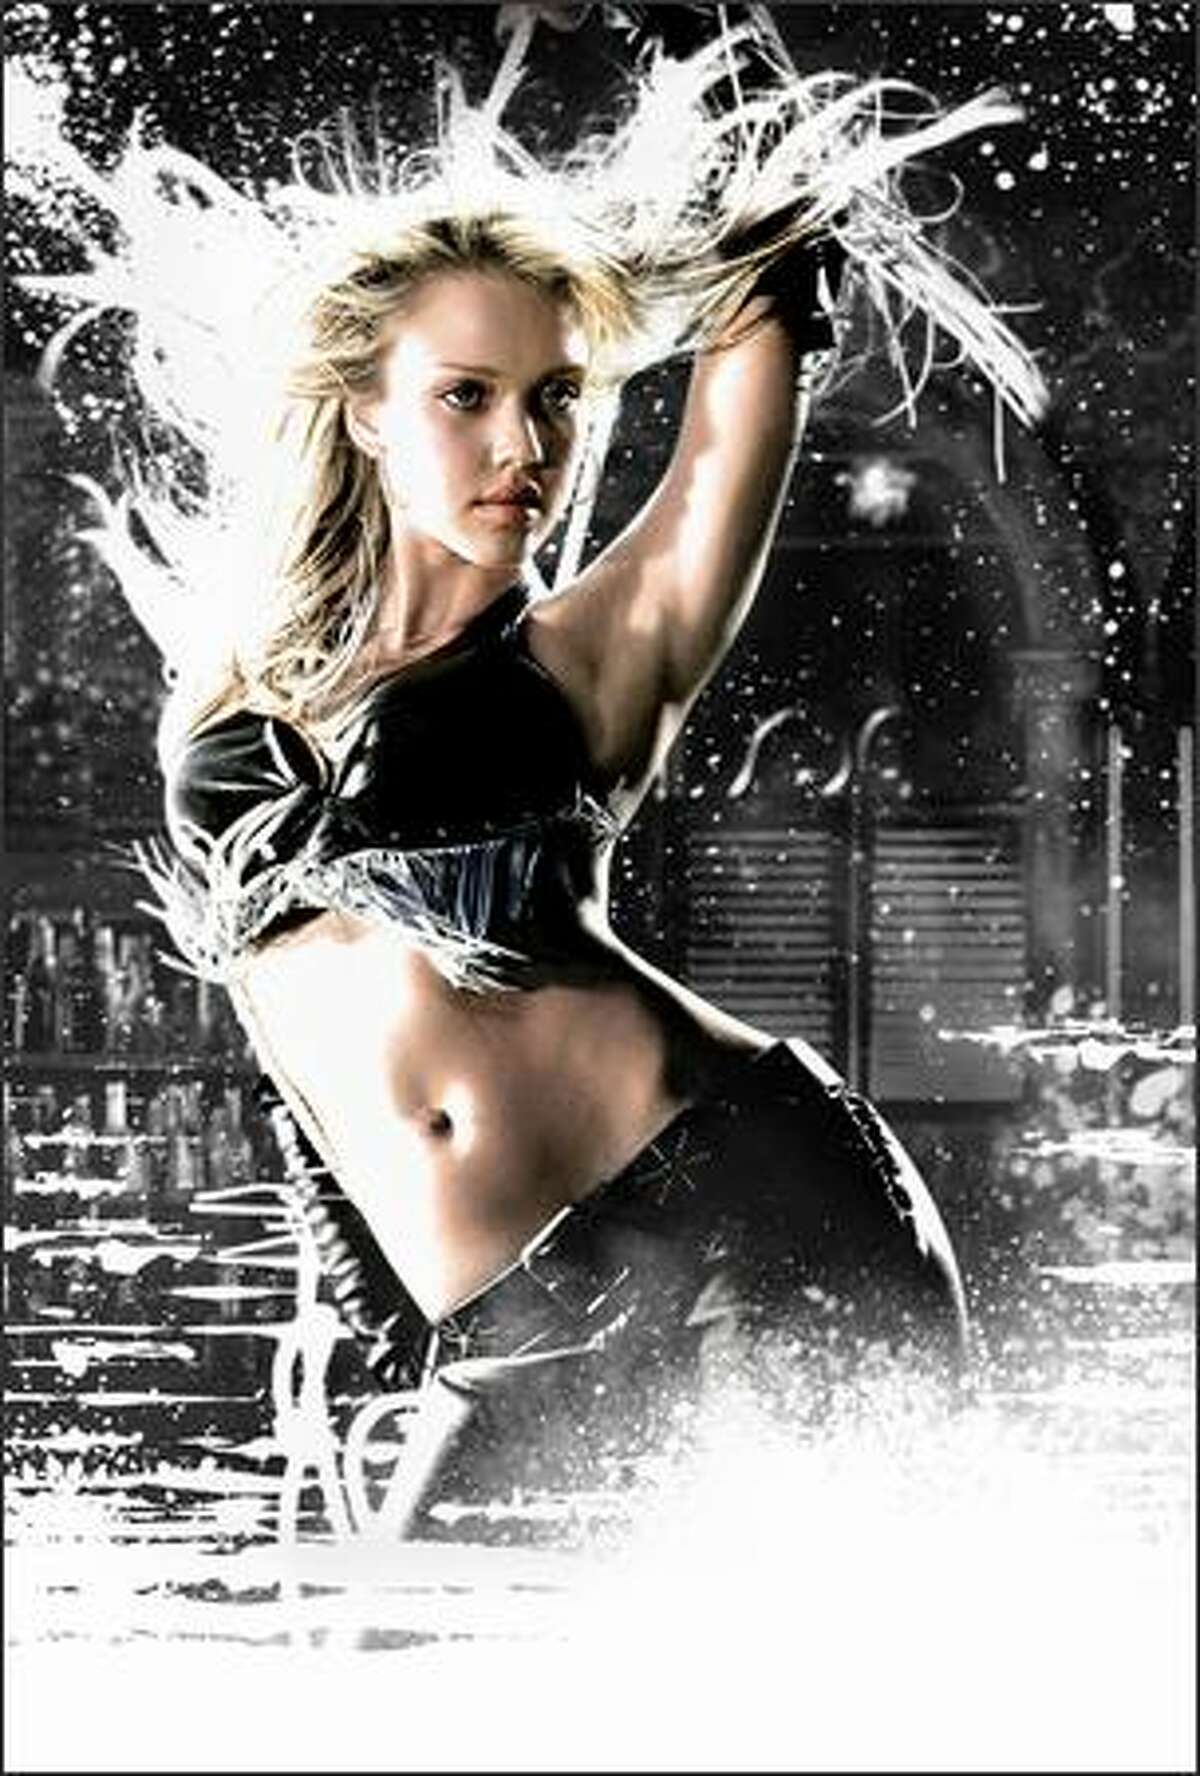 Jessica Alba is one of many stars in "Sin City," a cinematic adaptation of artist Frank Miller's graphic novels (or comic books, depending on your point of view) from the 1990s. The film also stars Rosario Dawson, Elijah Wood, Bruce Willis, Benicio Del Toro, Josh Hartnett, Michael Madsen, Brittany Murphy, Clive Owen and Mickey Rourke.